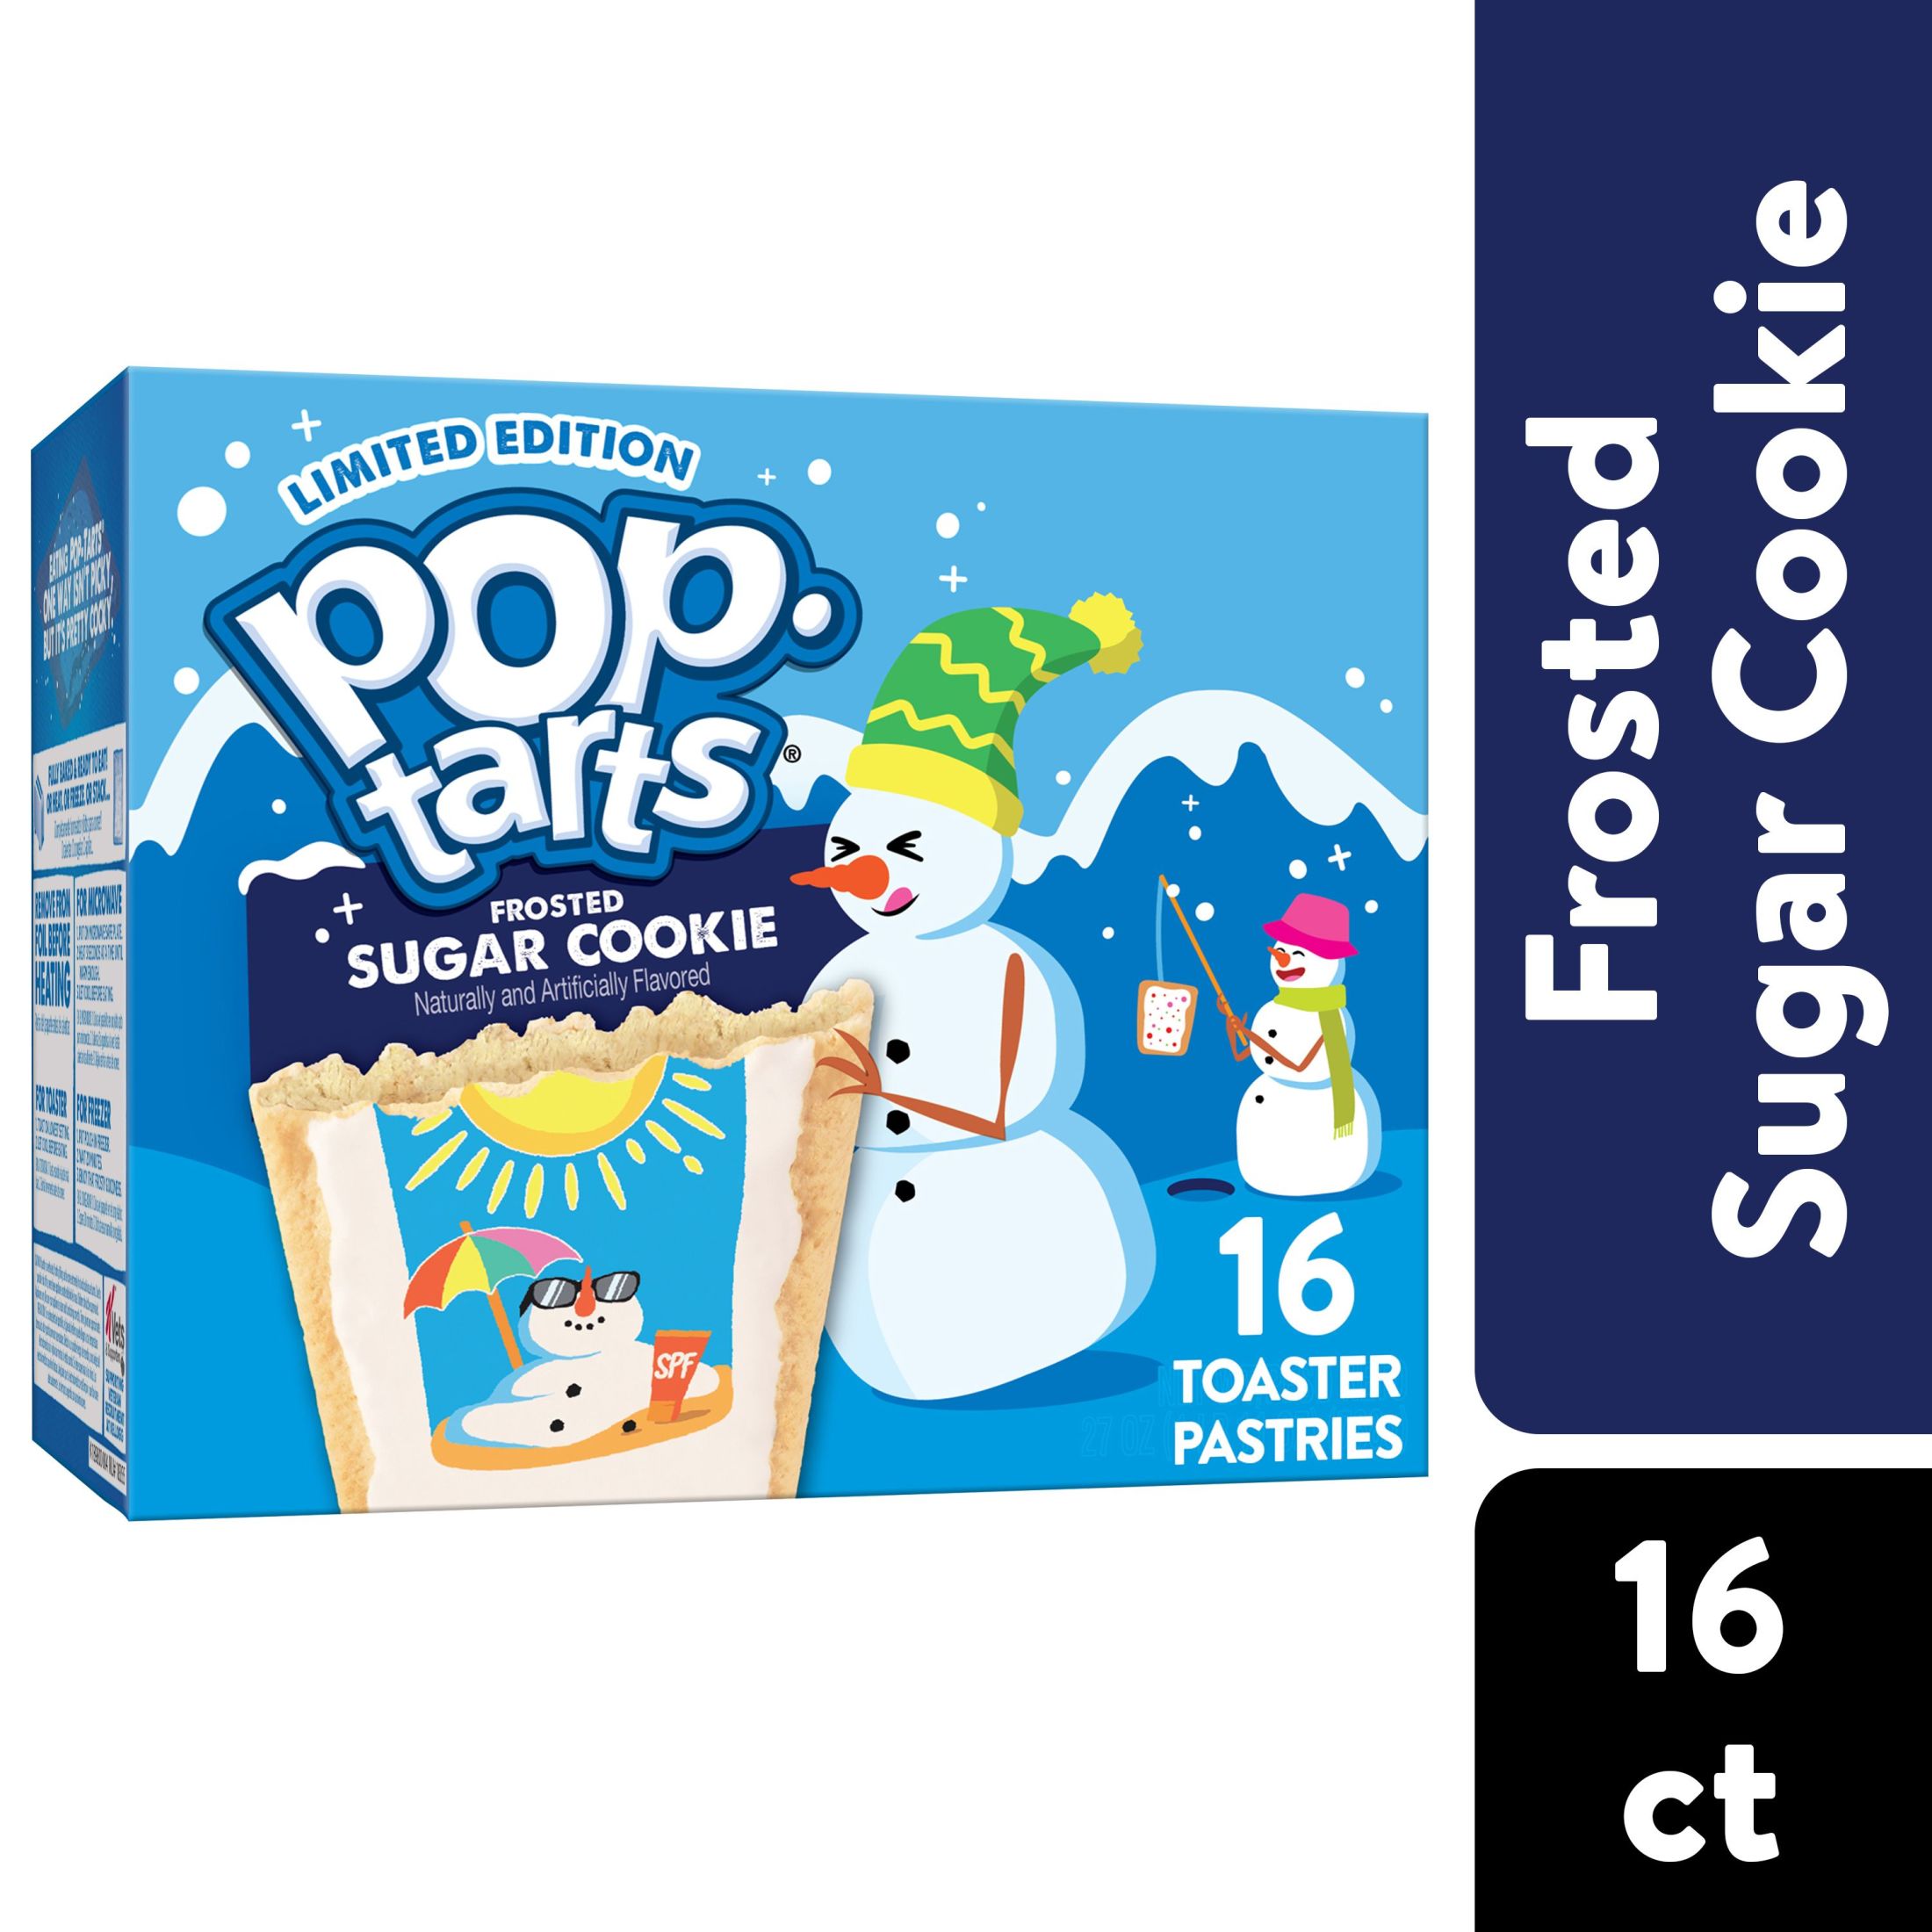 Pop-Tarts Frosted Sugar Cookie Instant Breakfast Toaster Pastries, Shelf-Stable, Ready-to-Eat, Holiday Snack Foods, 27 oz, 16 Count Box - image 1 of 12